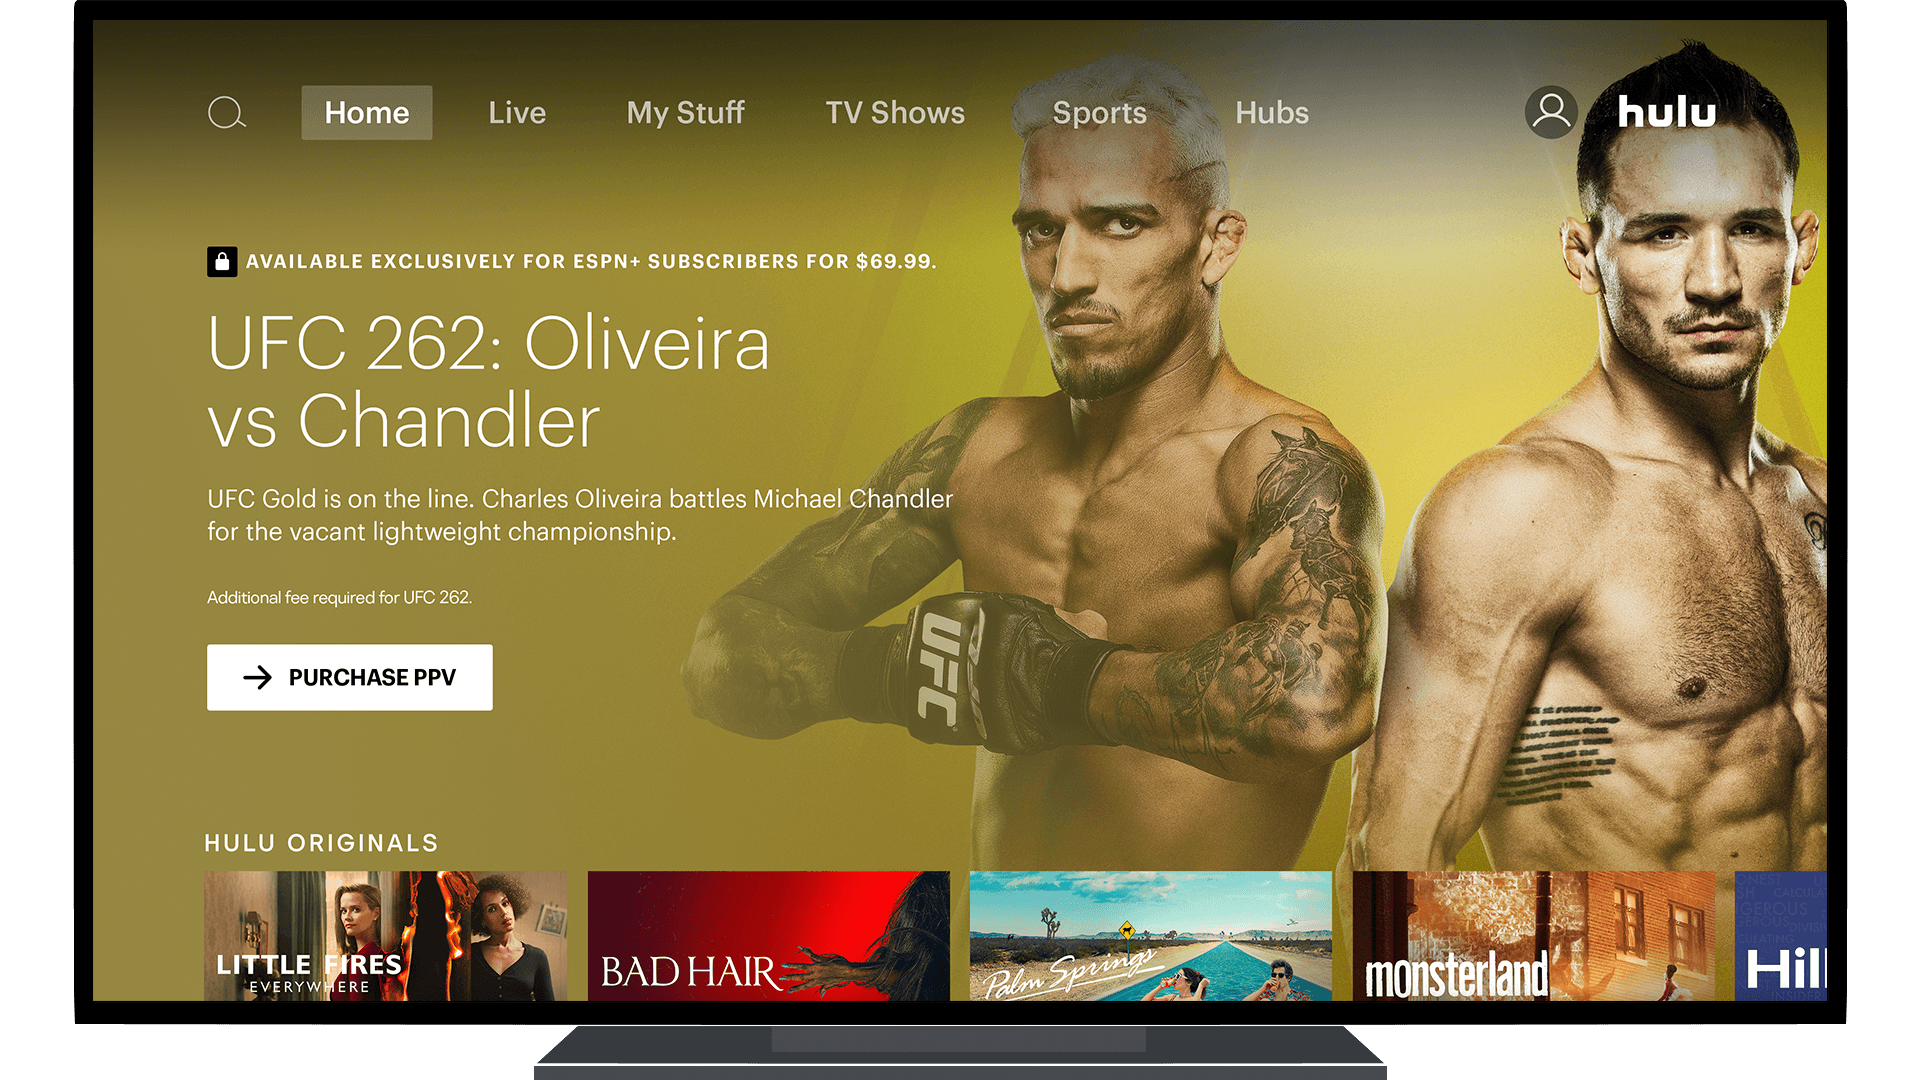 UFC Pay Per View Events Can Now Be Accessed Through ESPN+ on Hulu